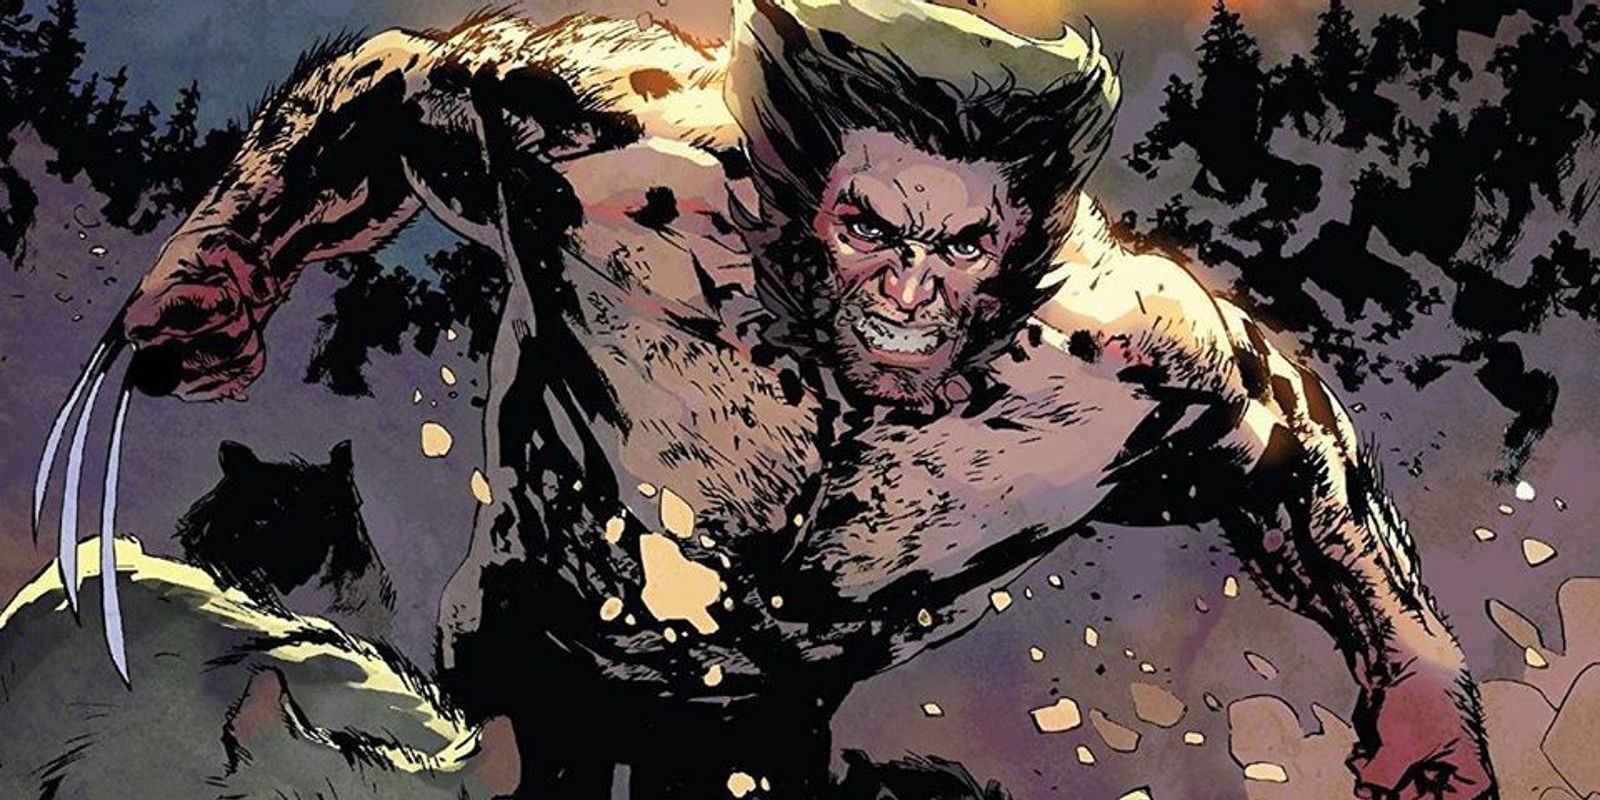 Wolverine charging through the forest with wolves in Wolverine: The Long Night